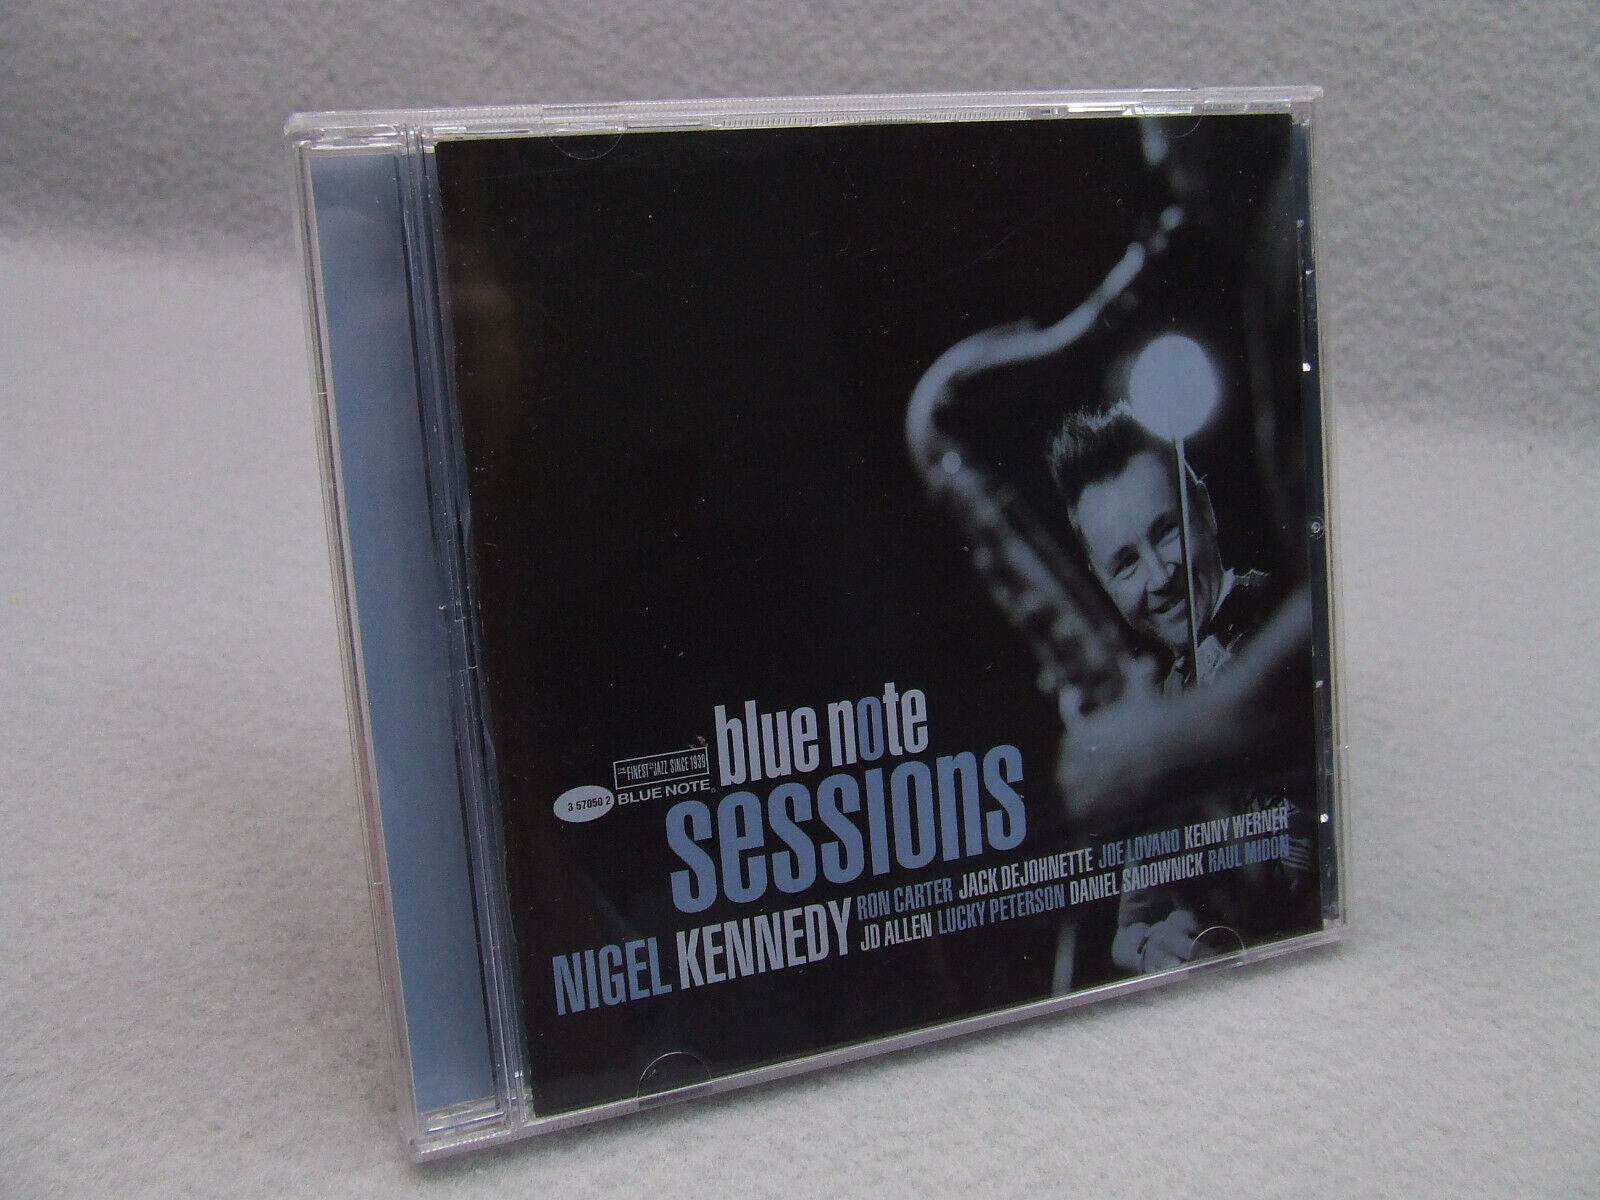 Nigel Kennedy - Blue Note Sessions (CD, 2006 EMI Records) Lucky Peterson